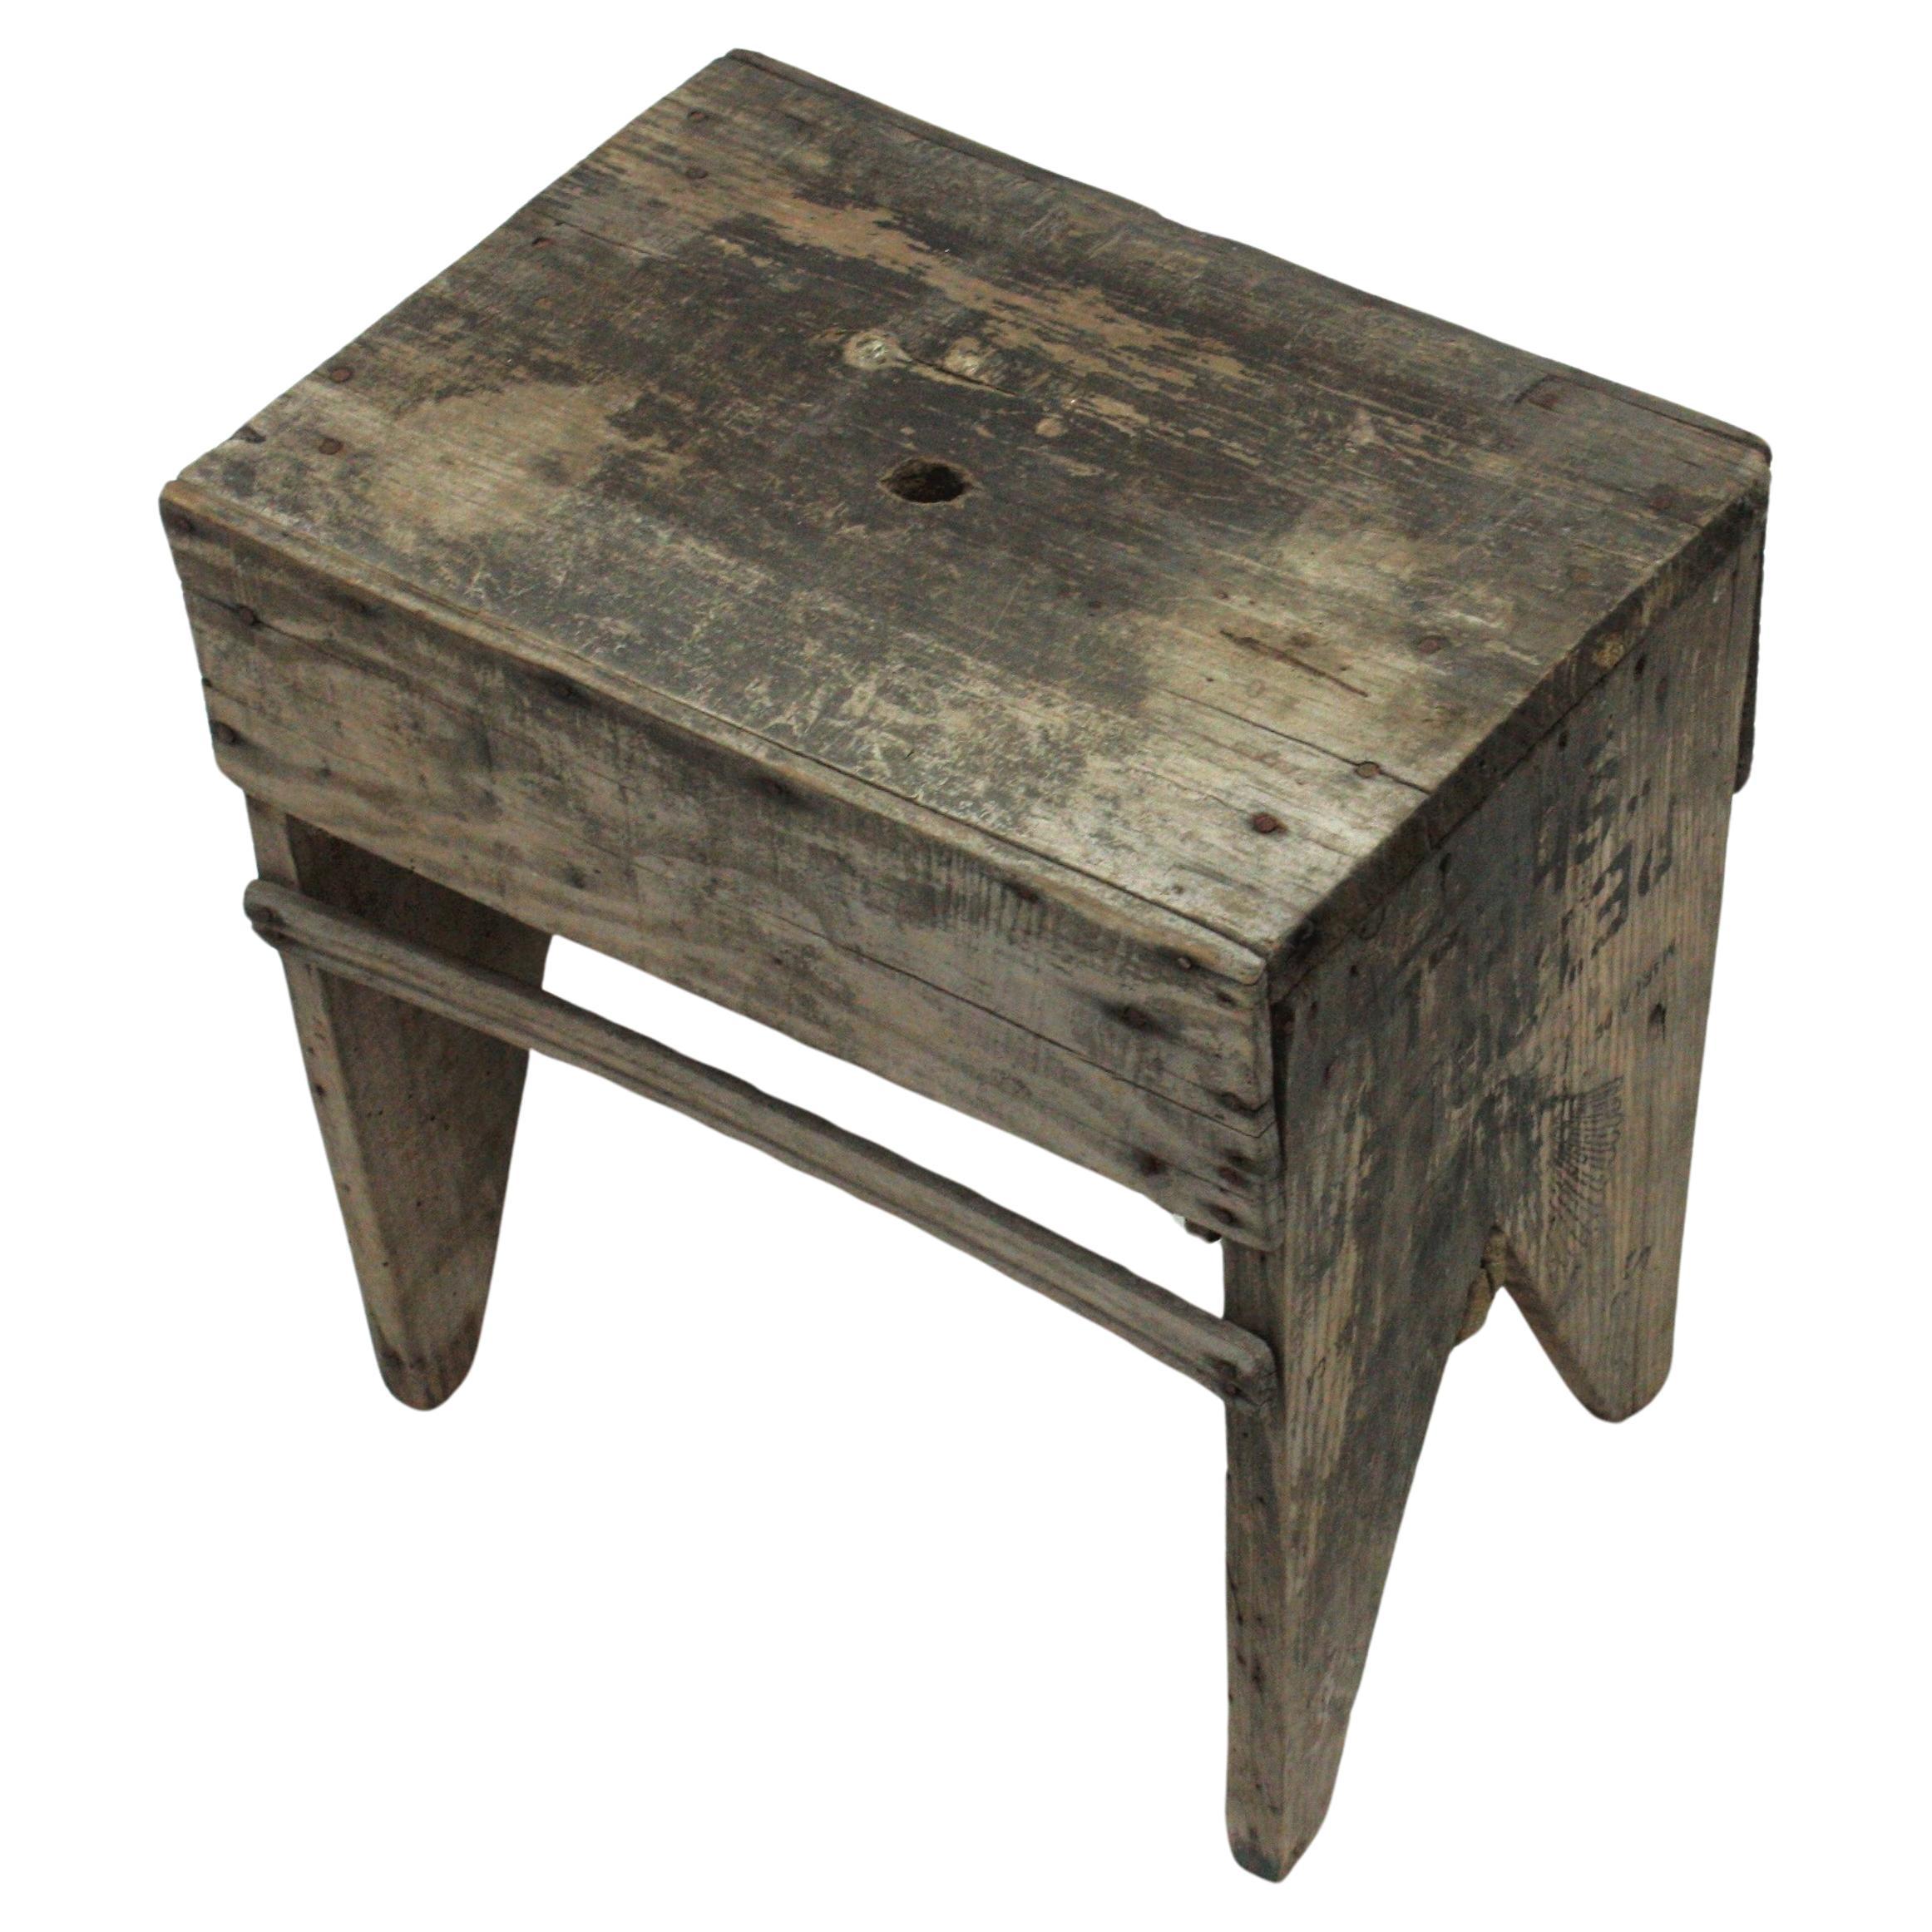 Wooden Stool, Spain, 1930s-1940s.
Made from recycled materials.
Handcrafted stool made with parts of shell oil company wood barrels.
To be used as stool, stand or side table.
Nice addition to any industrial, rustic or countryside house